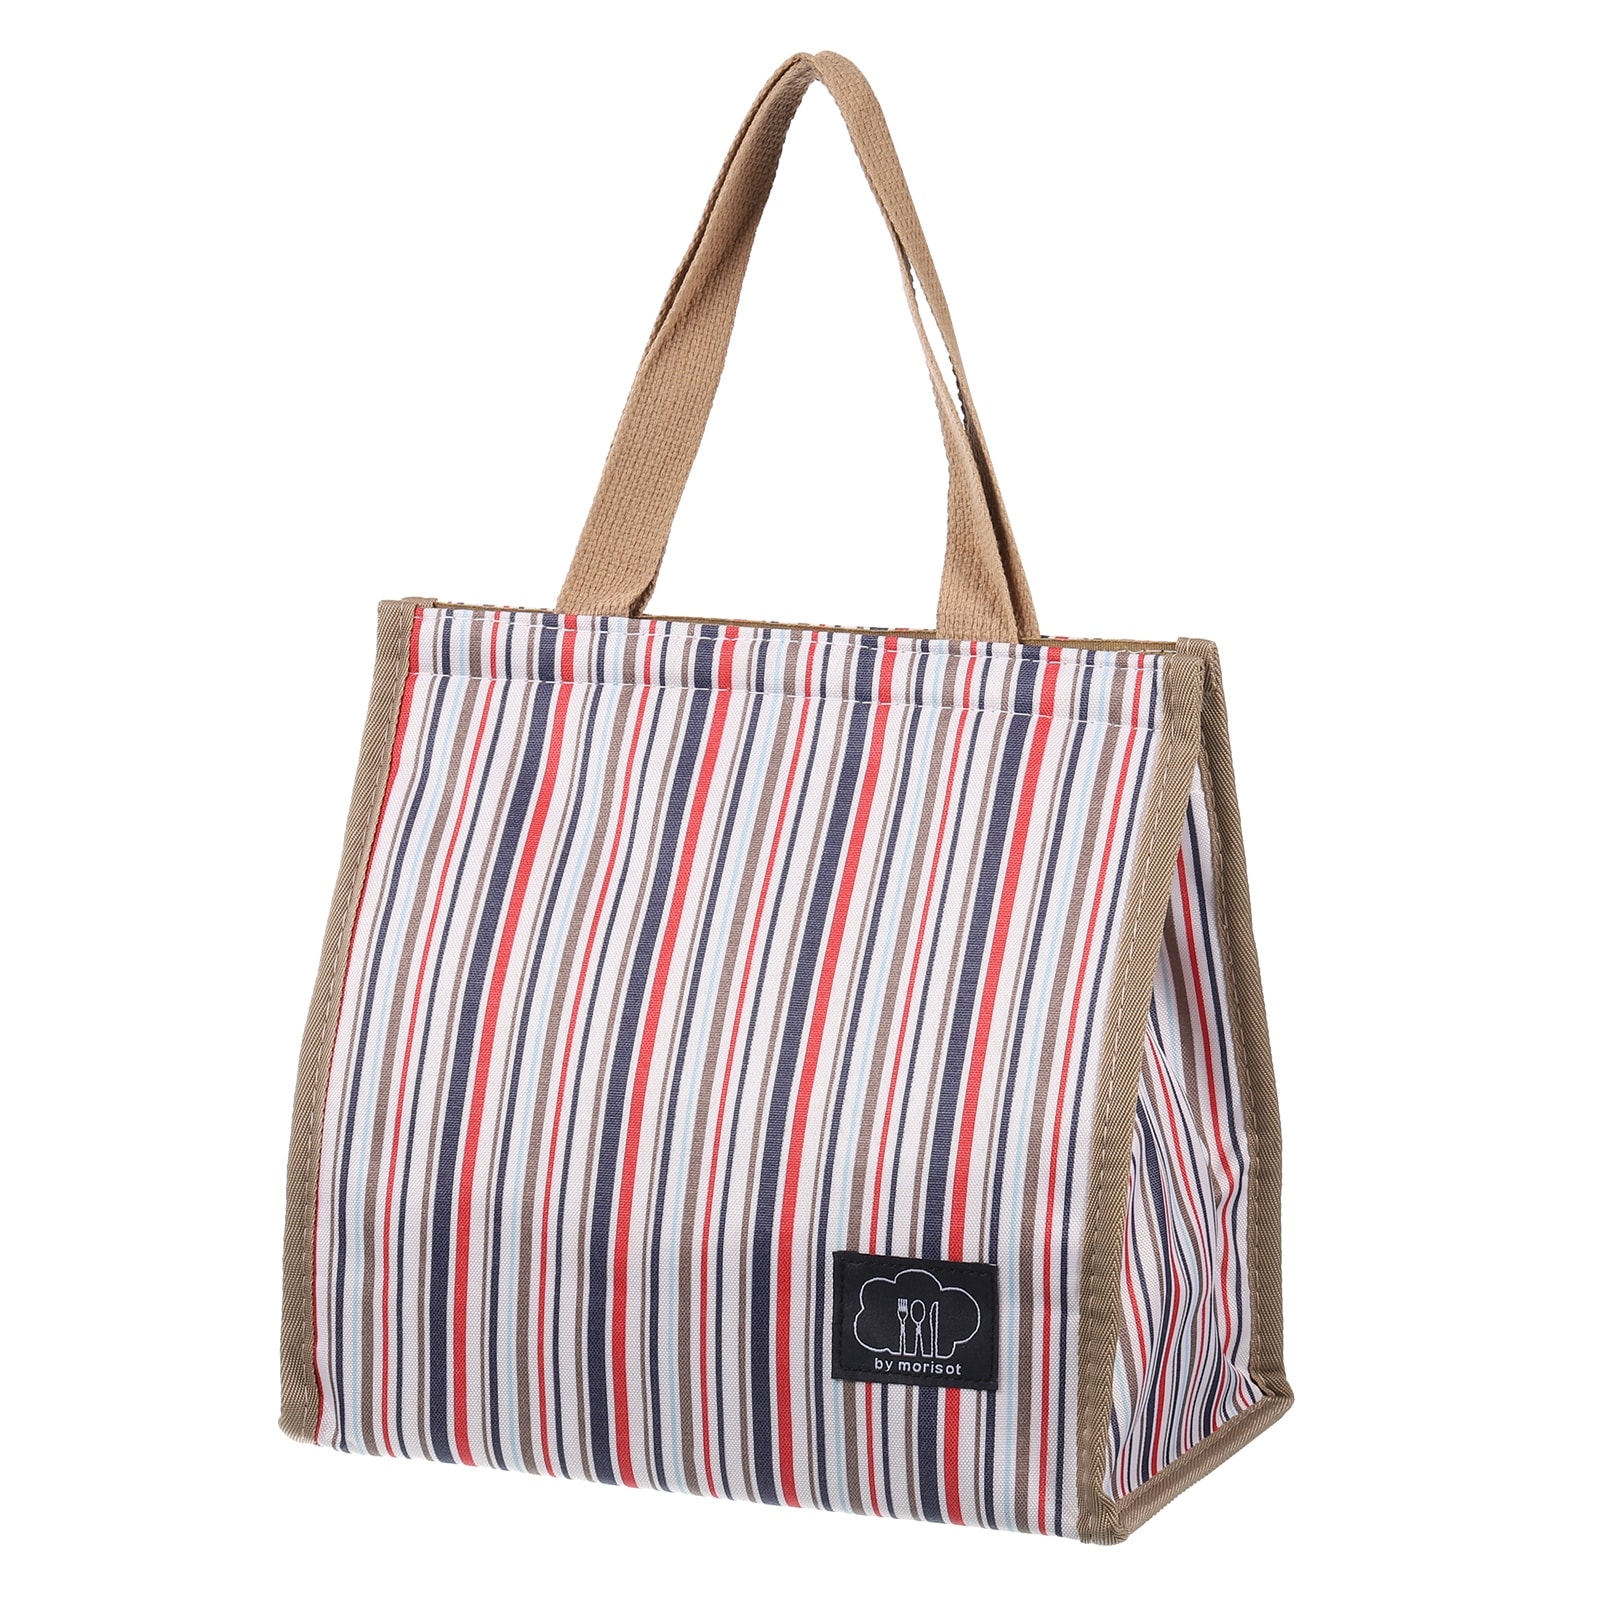 Insulated Lunch Bag, Lunch Tote Bag, 10.24"x6.69"x10.24", Contrast Color